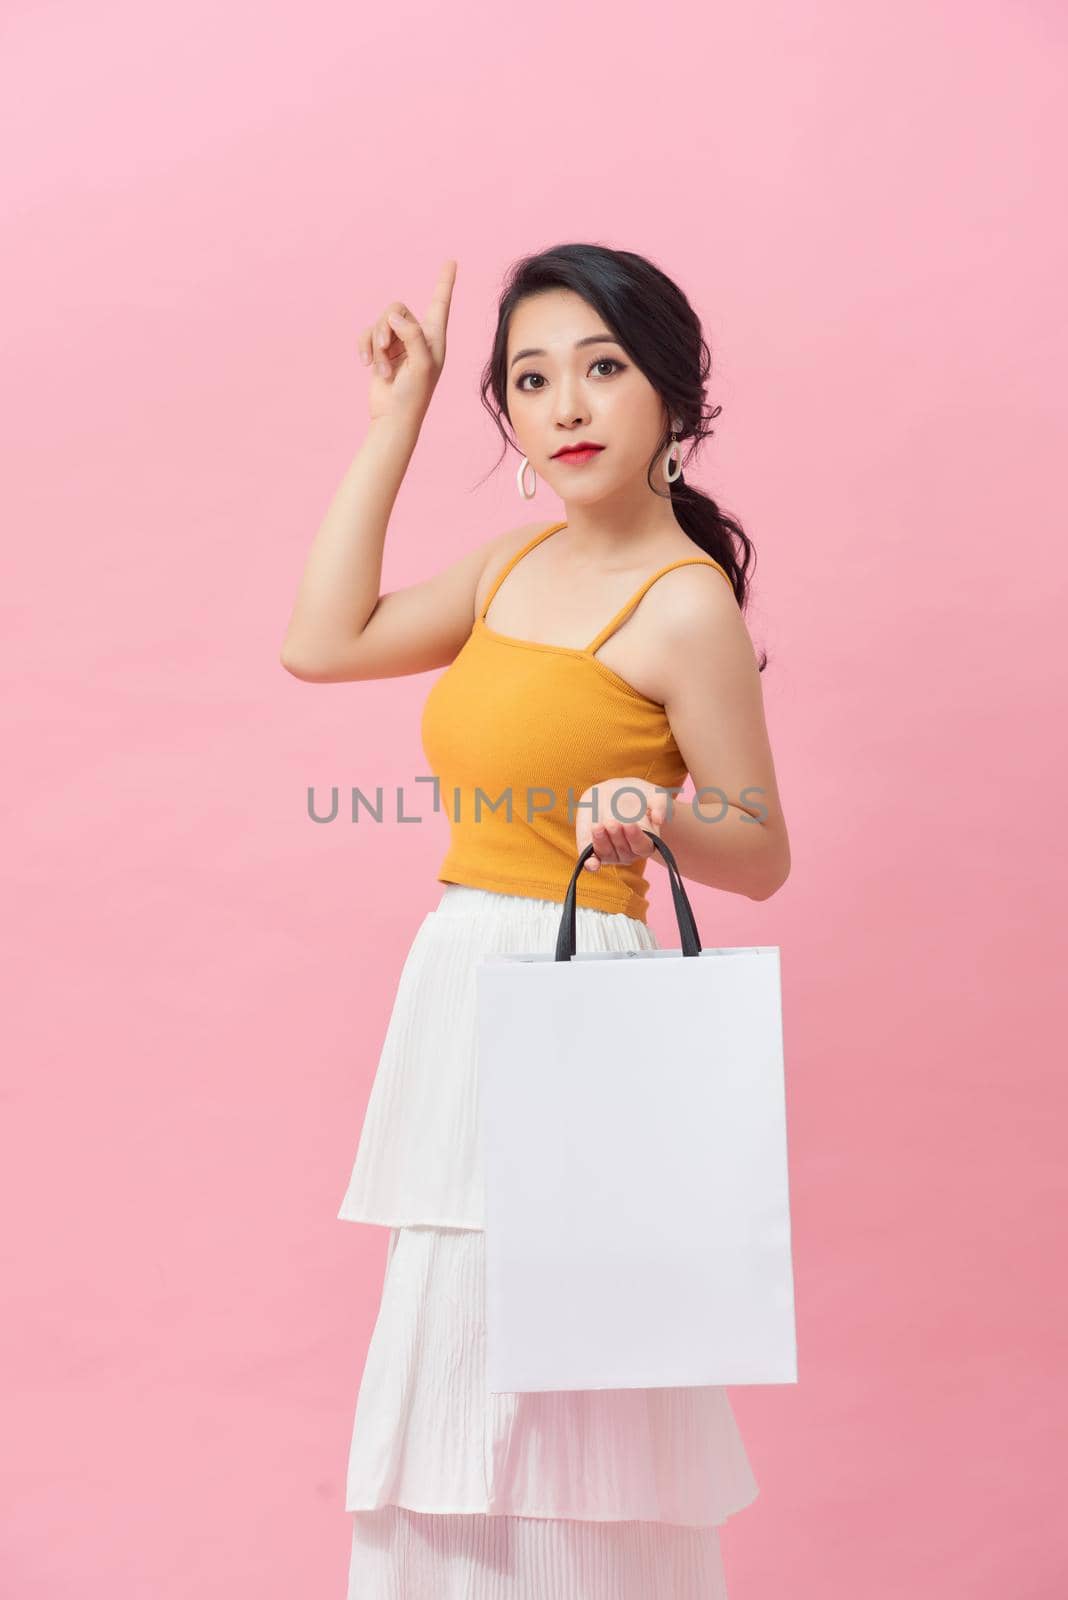 Beautiful Asian woman holding shopping bag while over pink background.